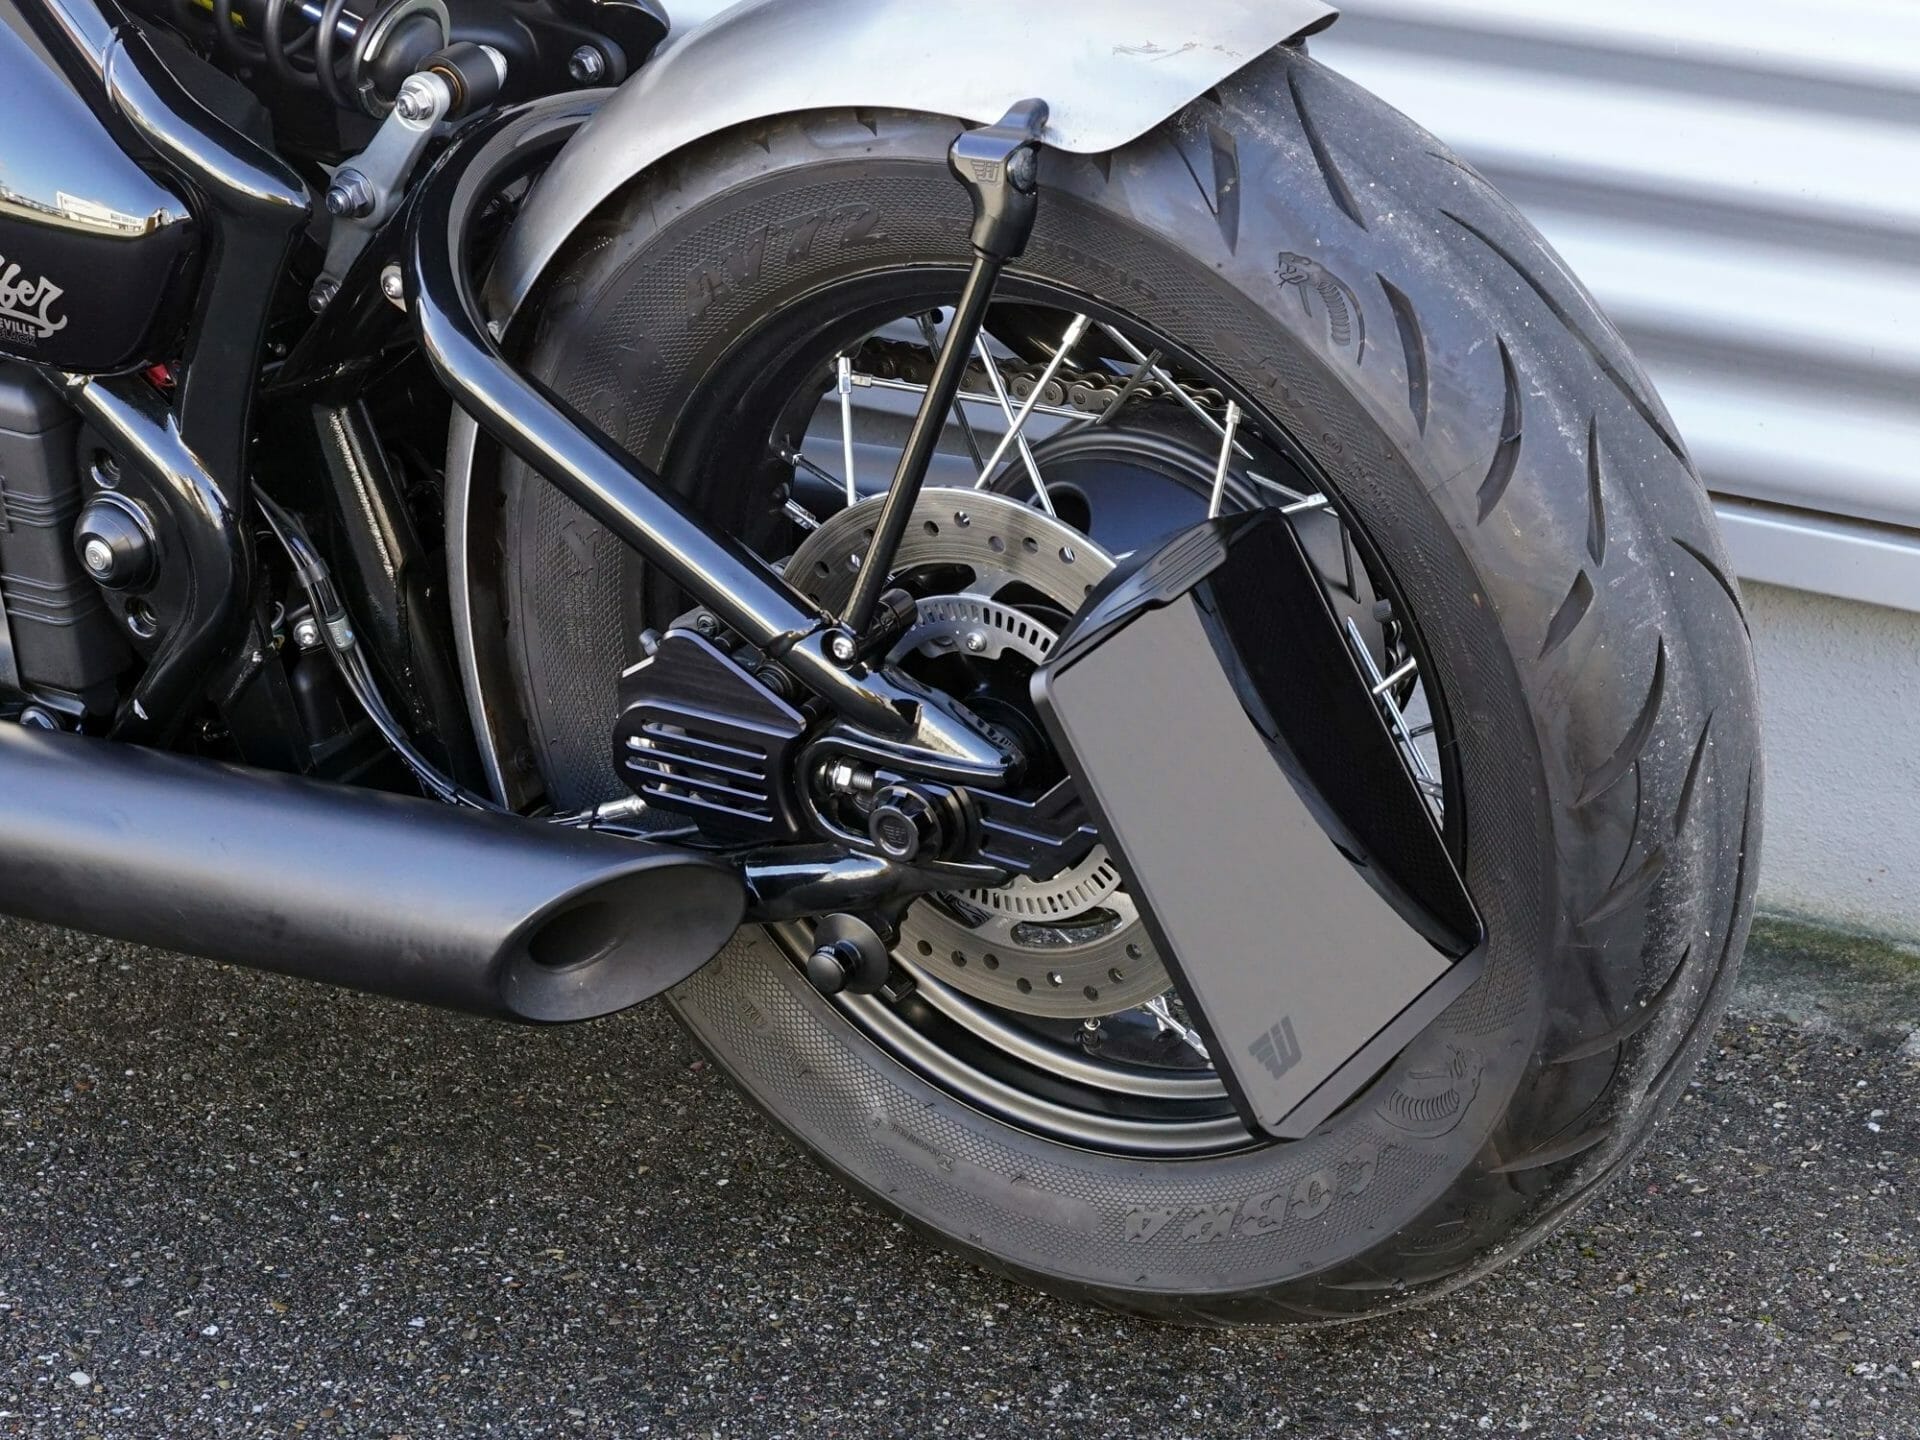 Lateral license plate holder in the design "2Stripes" by WUNDERKIND
- also in the MOTORCYCLES.NEWS APP